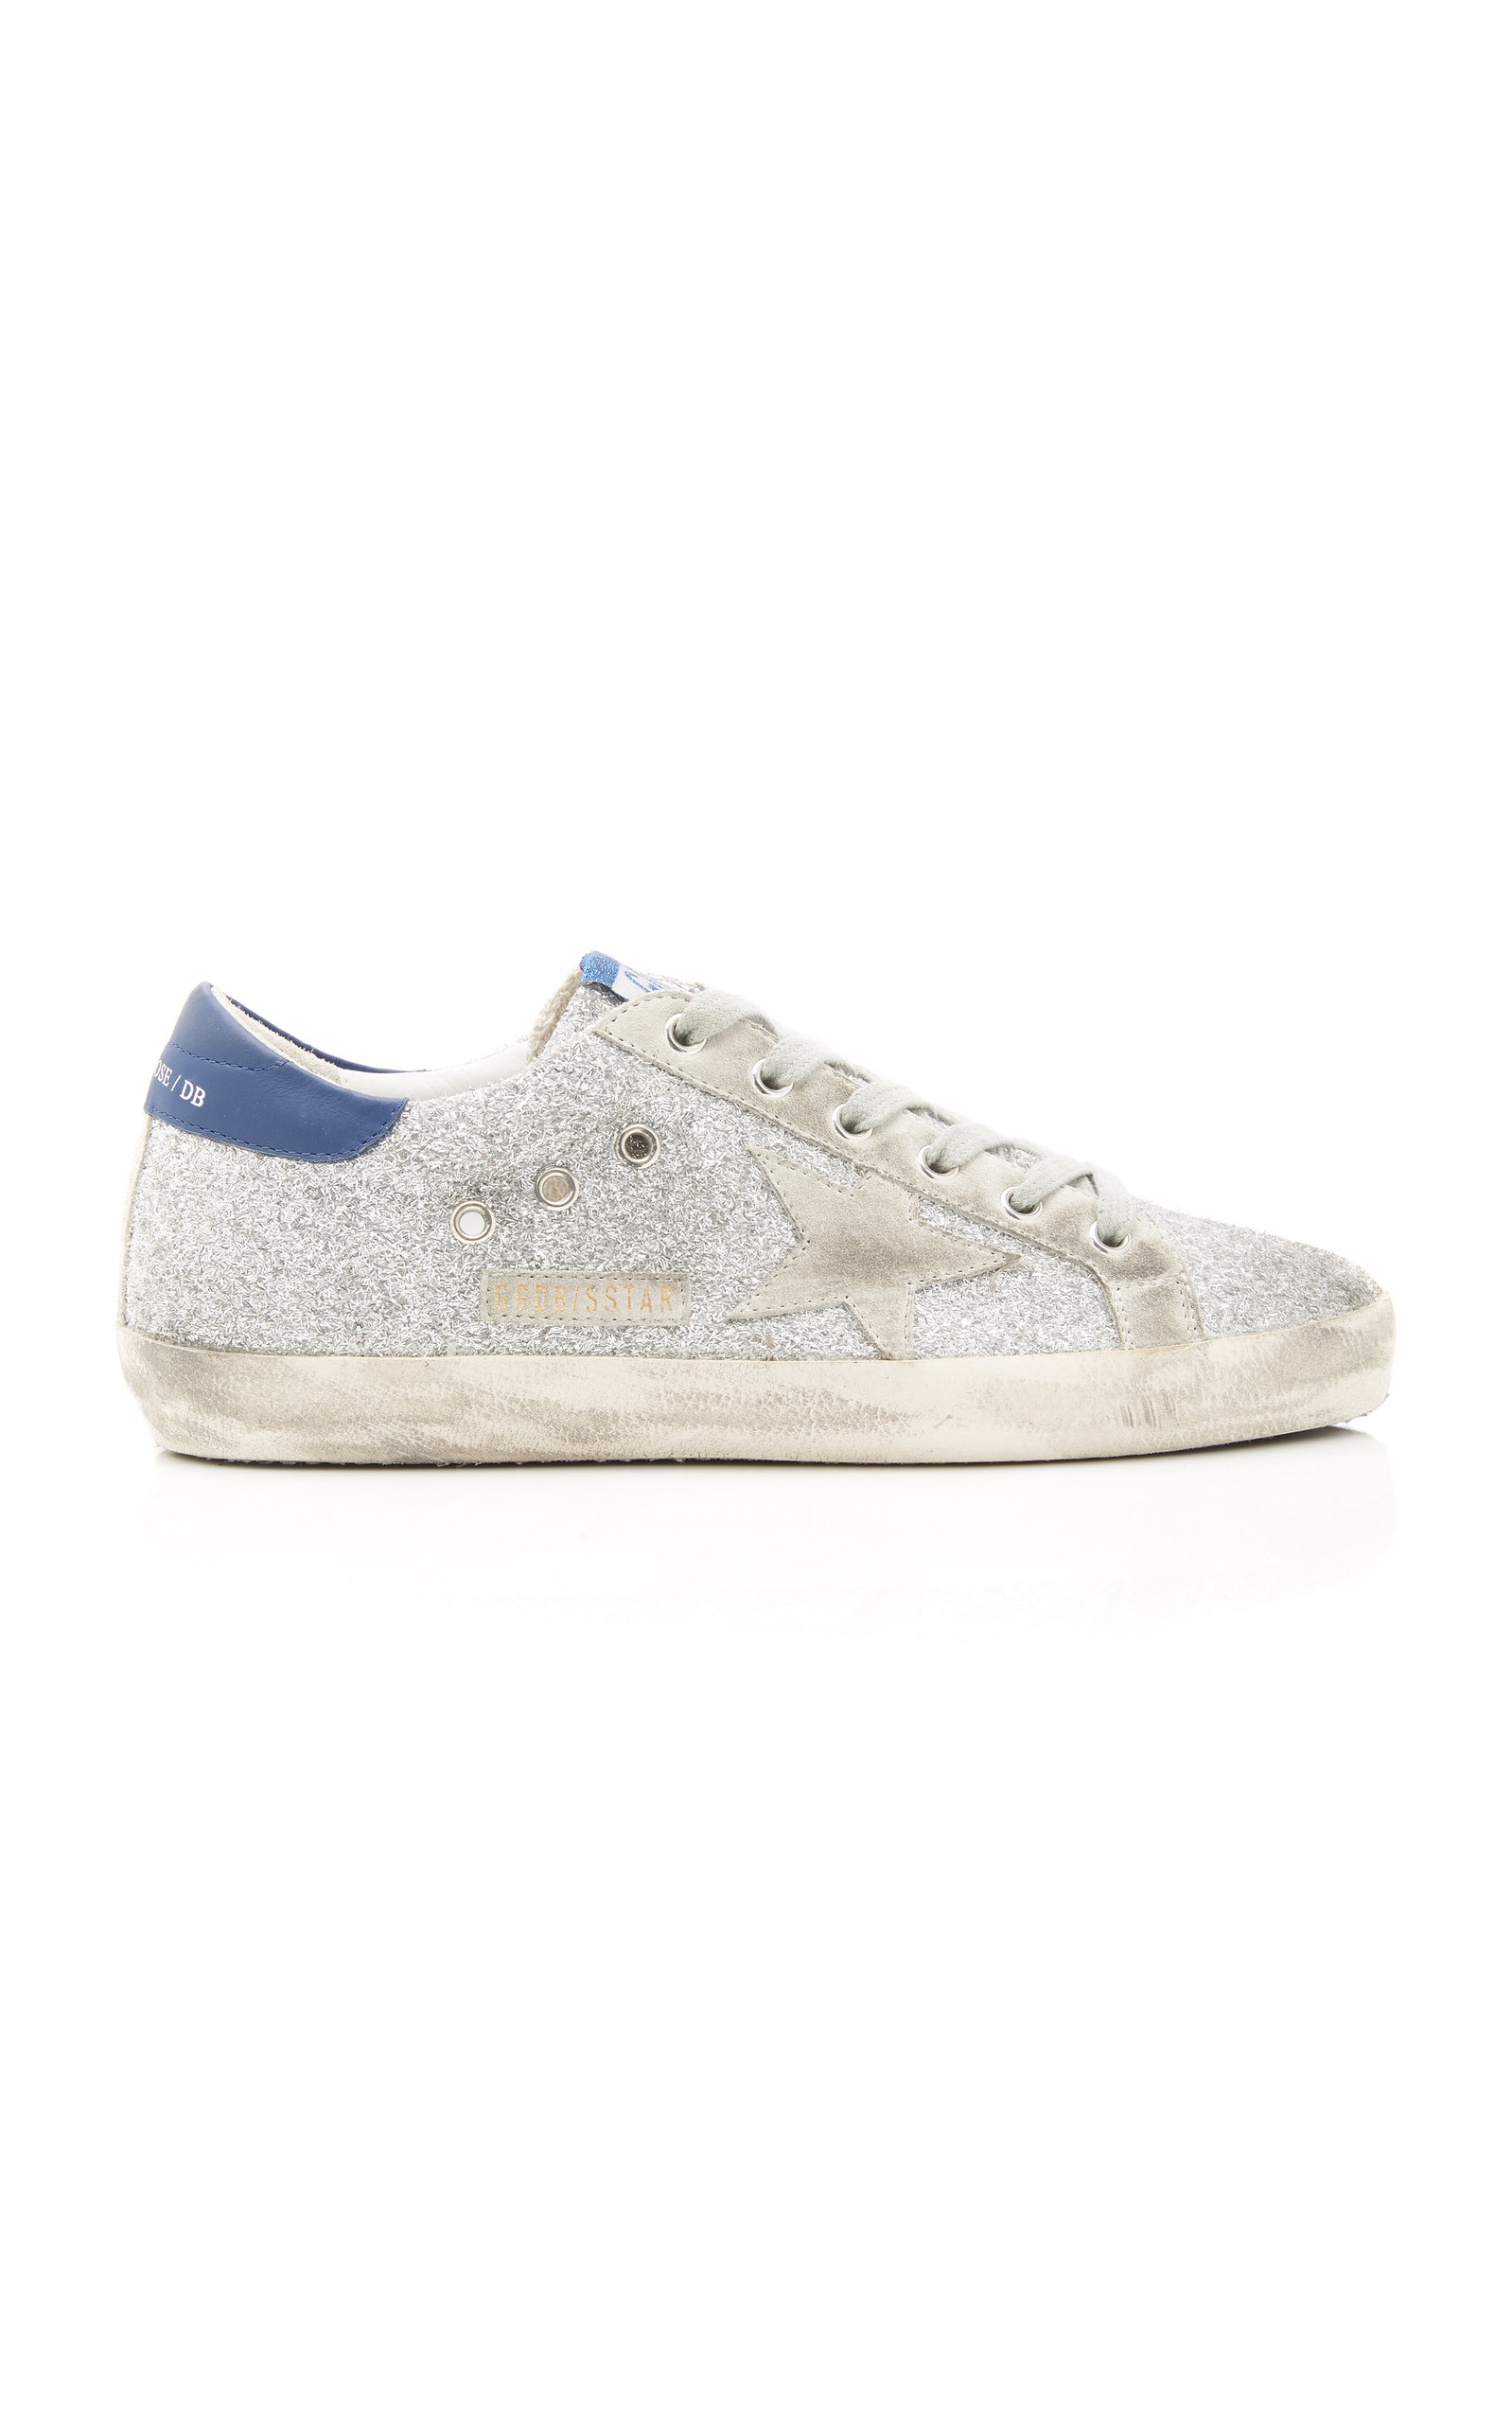 golden goose superstar glittered distressed leather sneakers